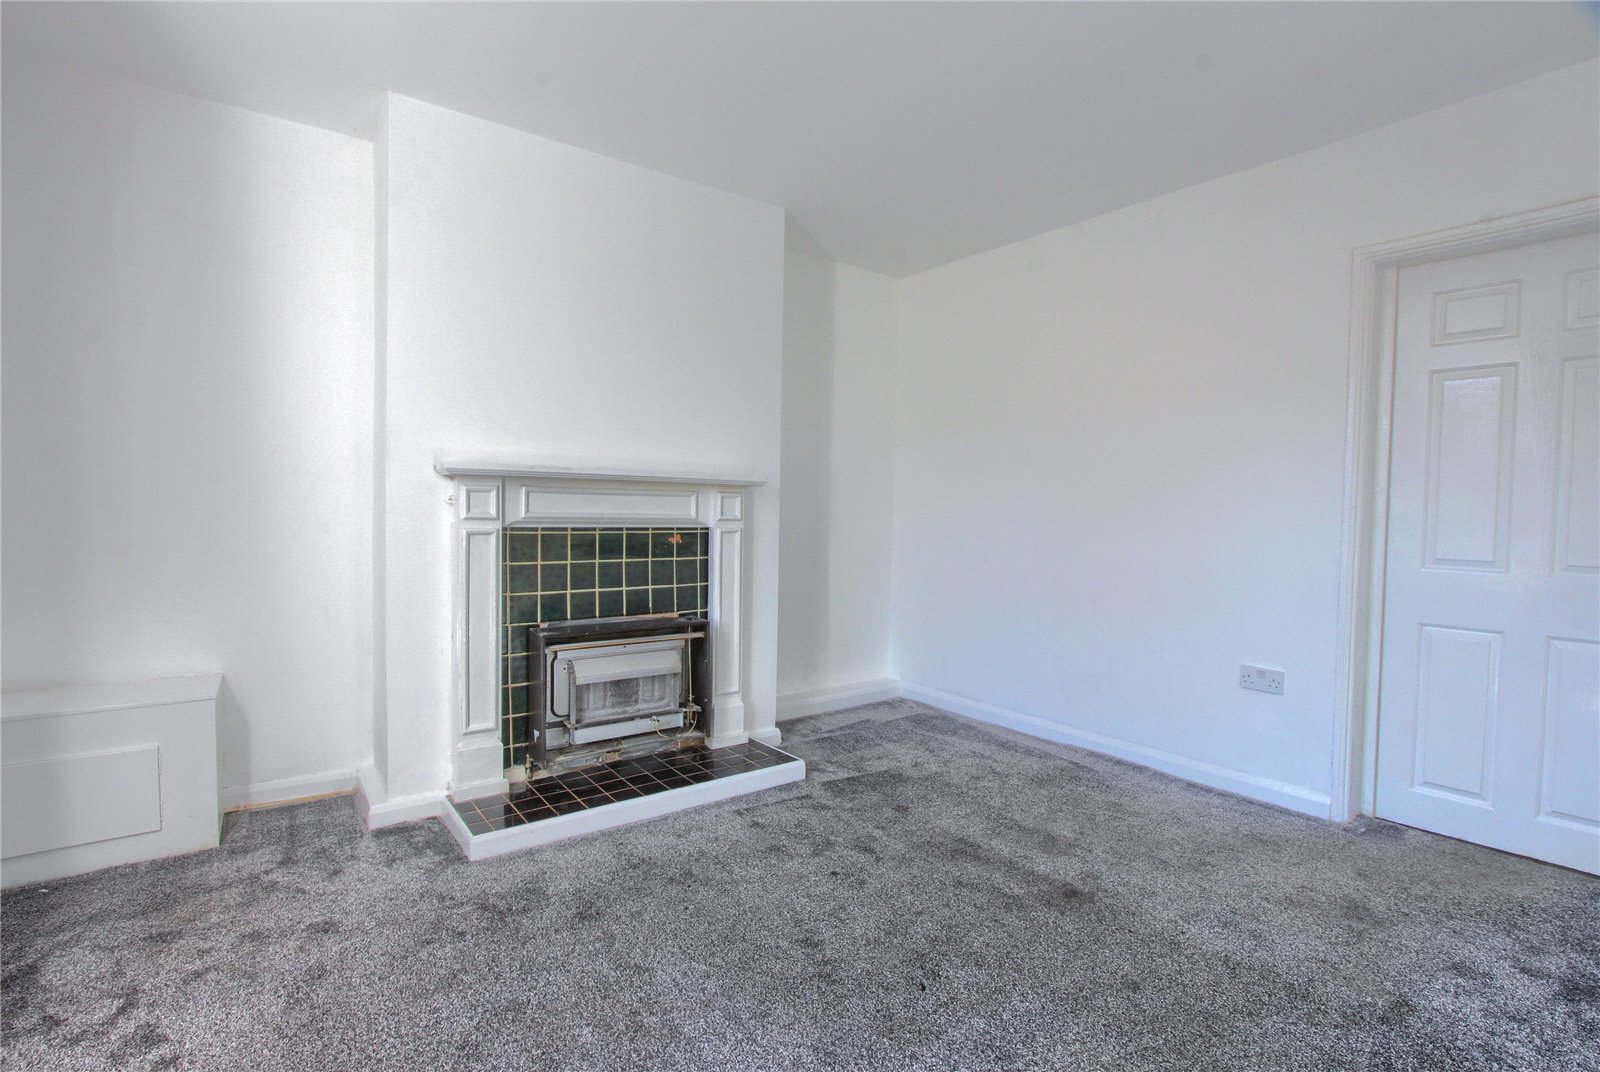 2 bed house for sale in Yeoman Terrace, Marske-by-the-Sea  - Property Image 2